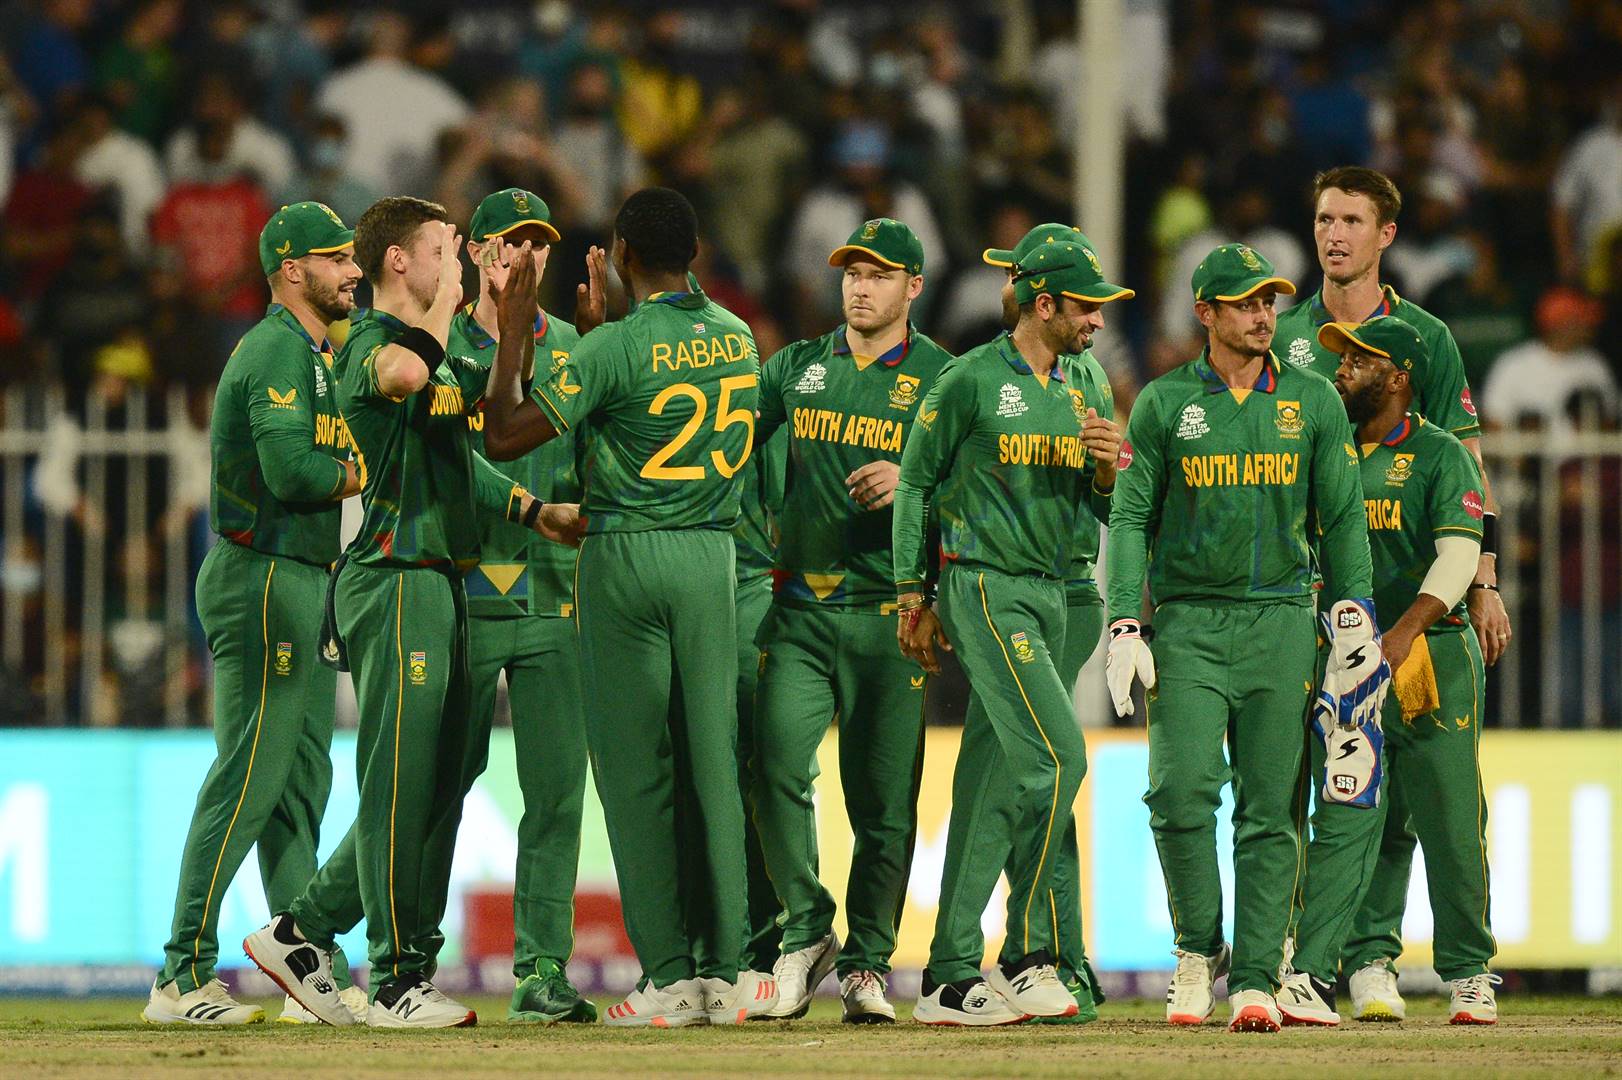 The ICC announced South Africa will host the One-Day World Cup in 2027 together with Zimbabwe and Namibia.